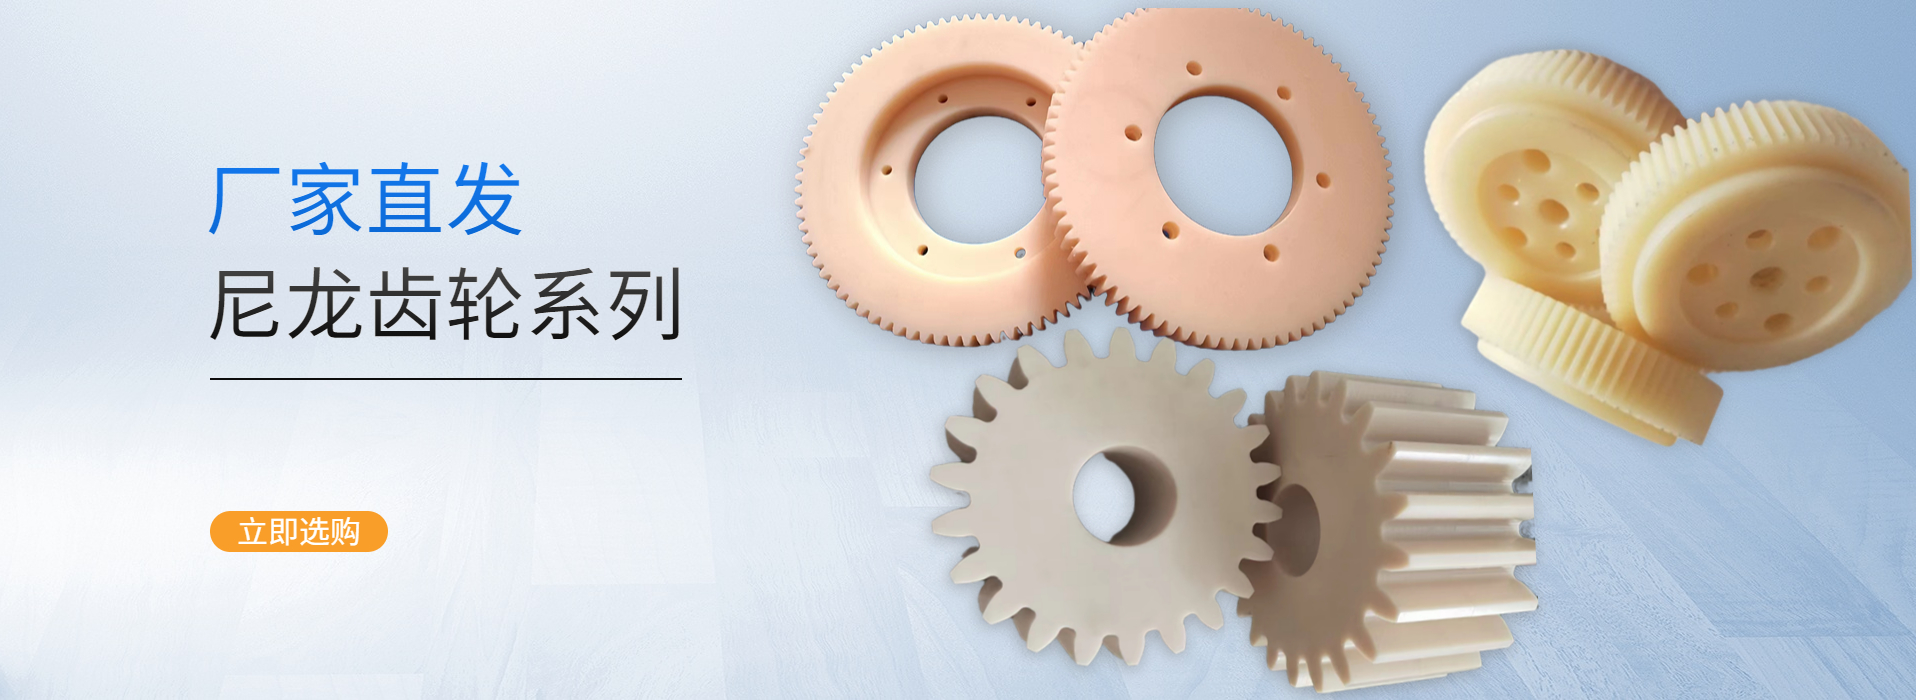 MC nylon pulley roller wear-resistant self-lubricating nylon wheel support for processing nylon products according to drawings and samples